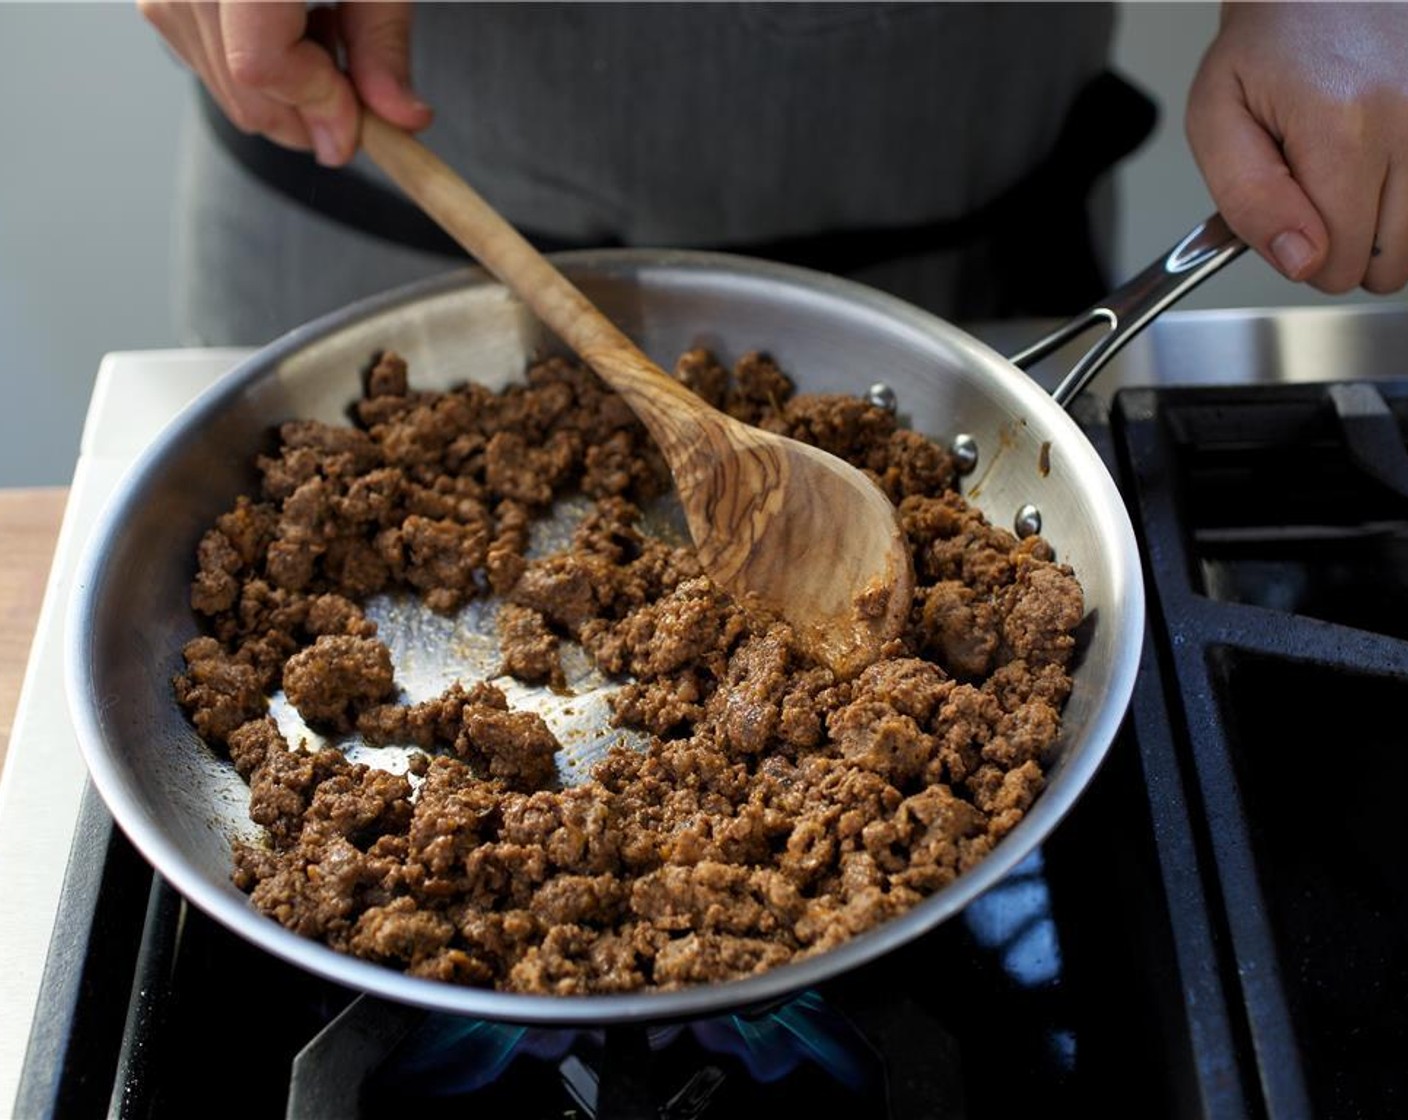 step 9 When hot, add the 85/15 Lean Ground Beef (8 oz), Herbes de Provence (1/2 Tbsp), Ground Nutmeg (1/2 tsp), and Tomato Paste (1 tsp). Cook and stir until beef is lightly brown and crumbly, about 10 minutes.